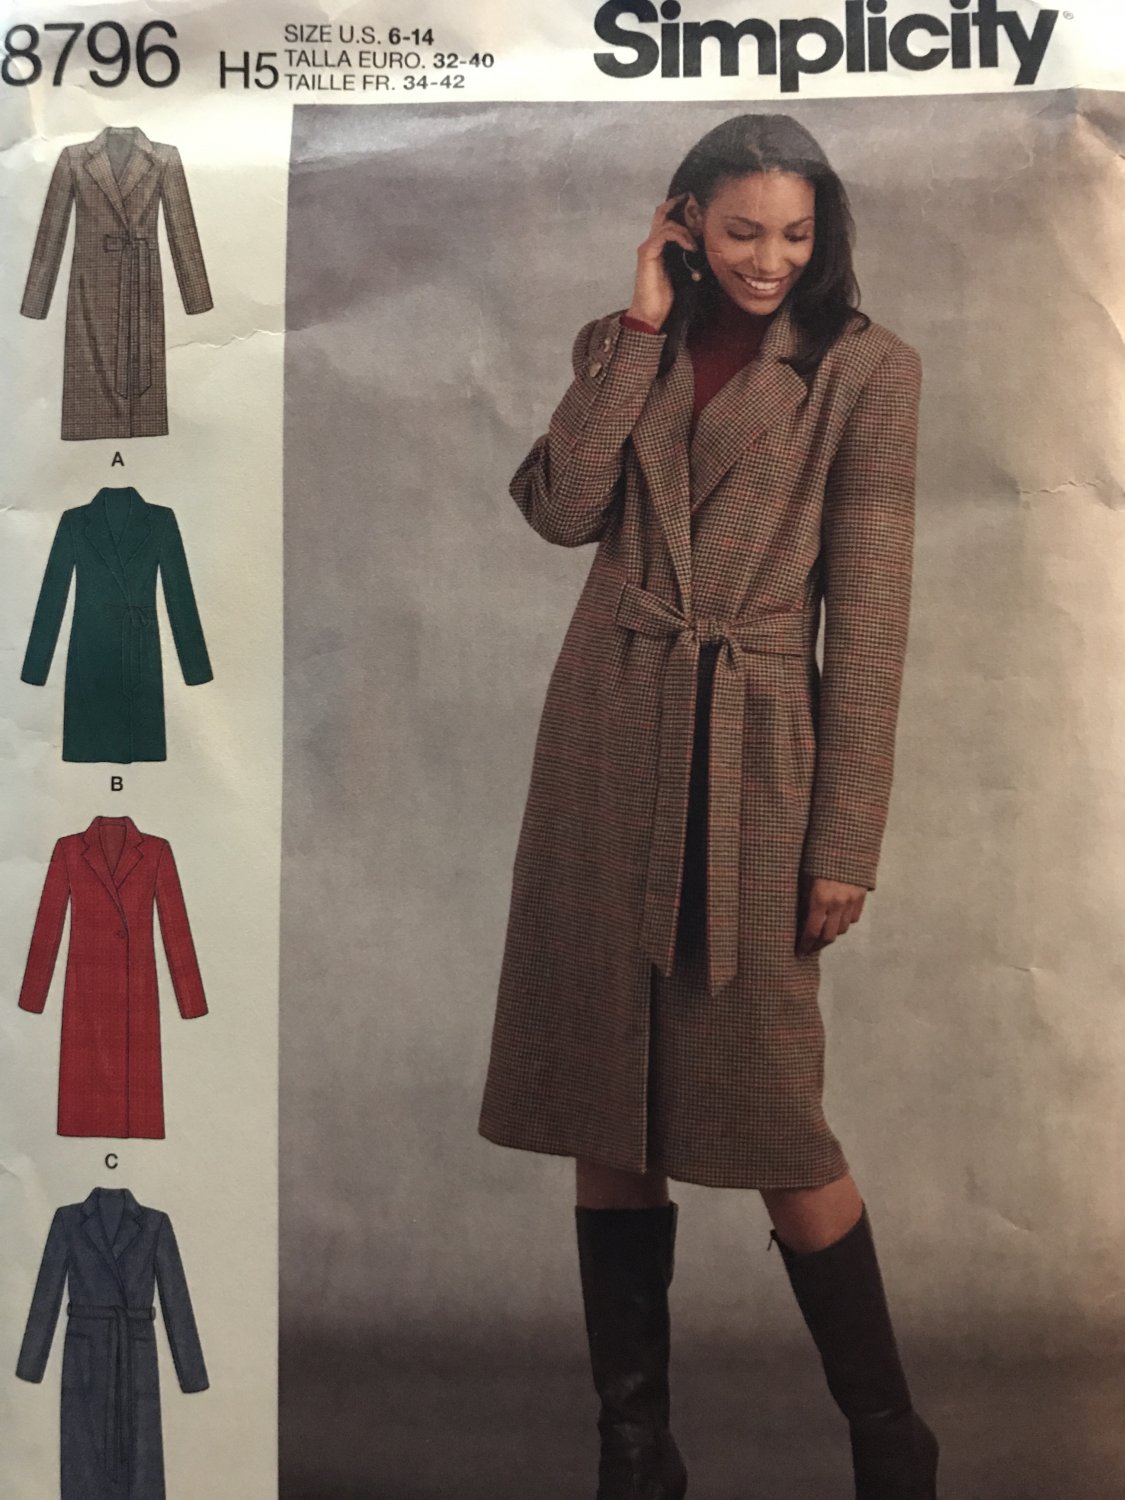 Simplicity 8796 Misses' Wrap Coat Sewing Pattern size 6 - 14